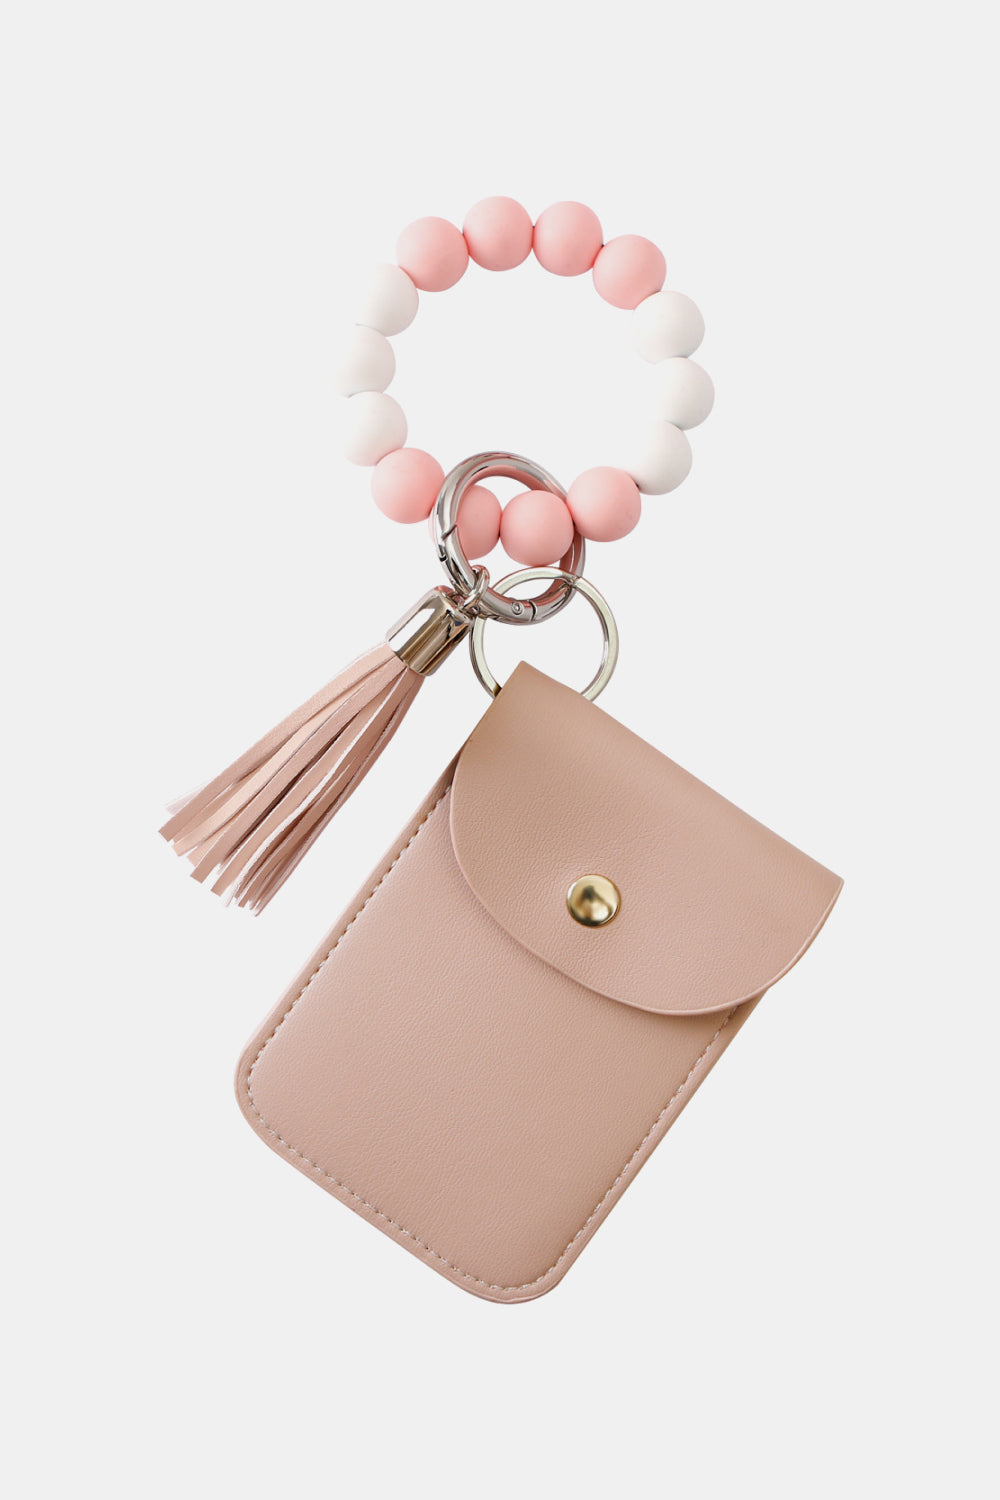 Trendsi Cupid Beauty Supplies Dusty Pink / One Size Keychains Bead Wristlet Key Chain with Wallet